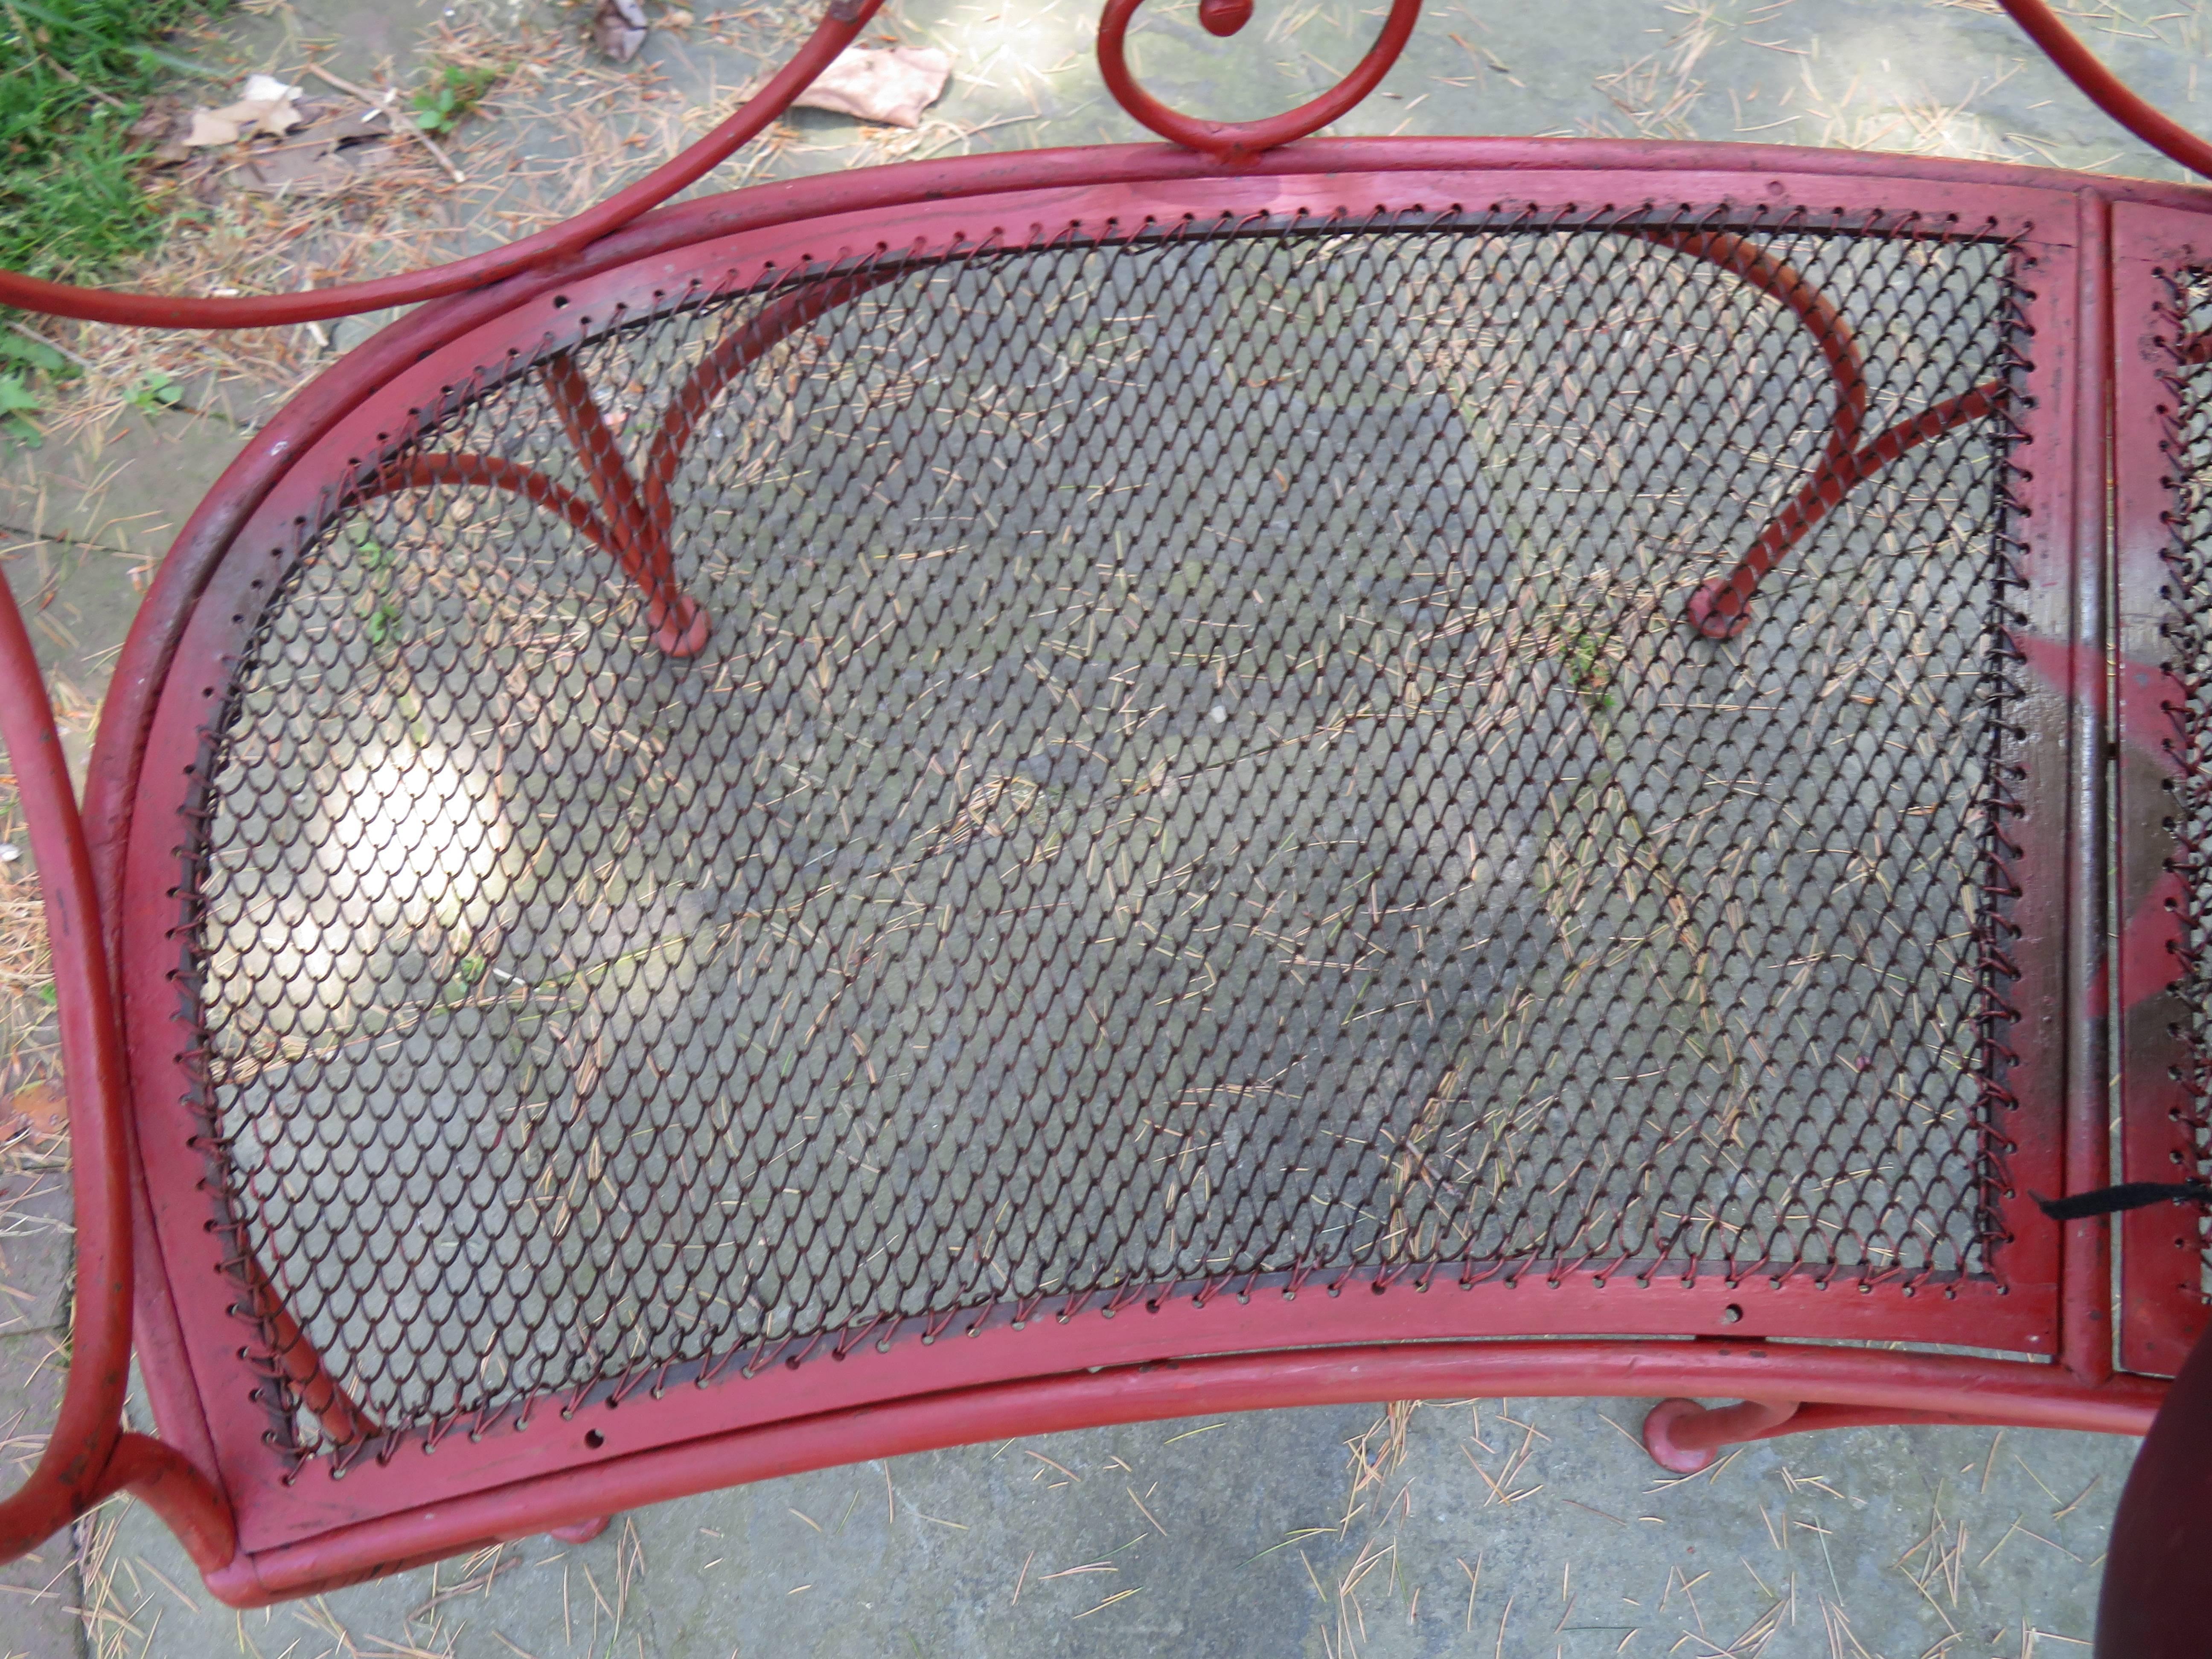 Painted Charming Curved Scrolled Iron Garden Patio Bench, Mid-Century Modern